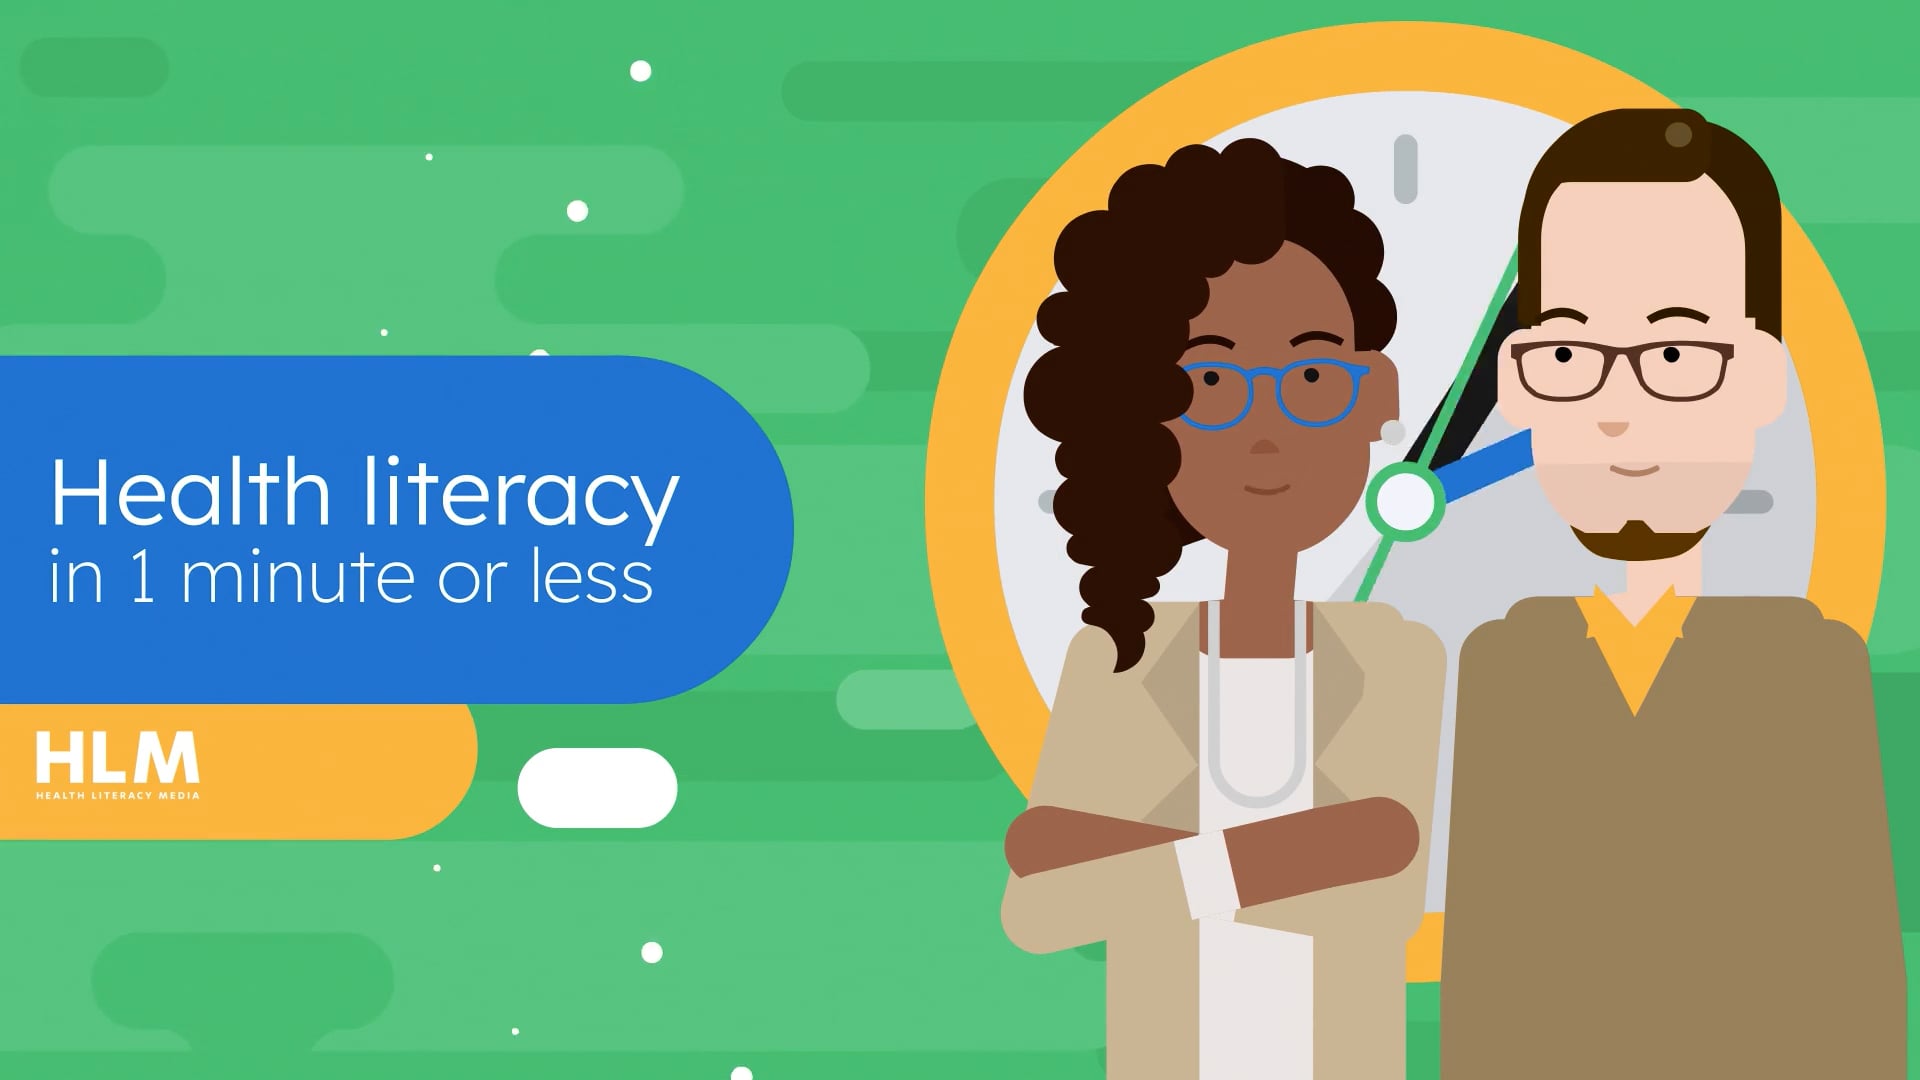 Health literacy in 1 minute or less: What is health literacy?